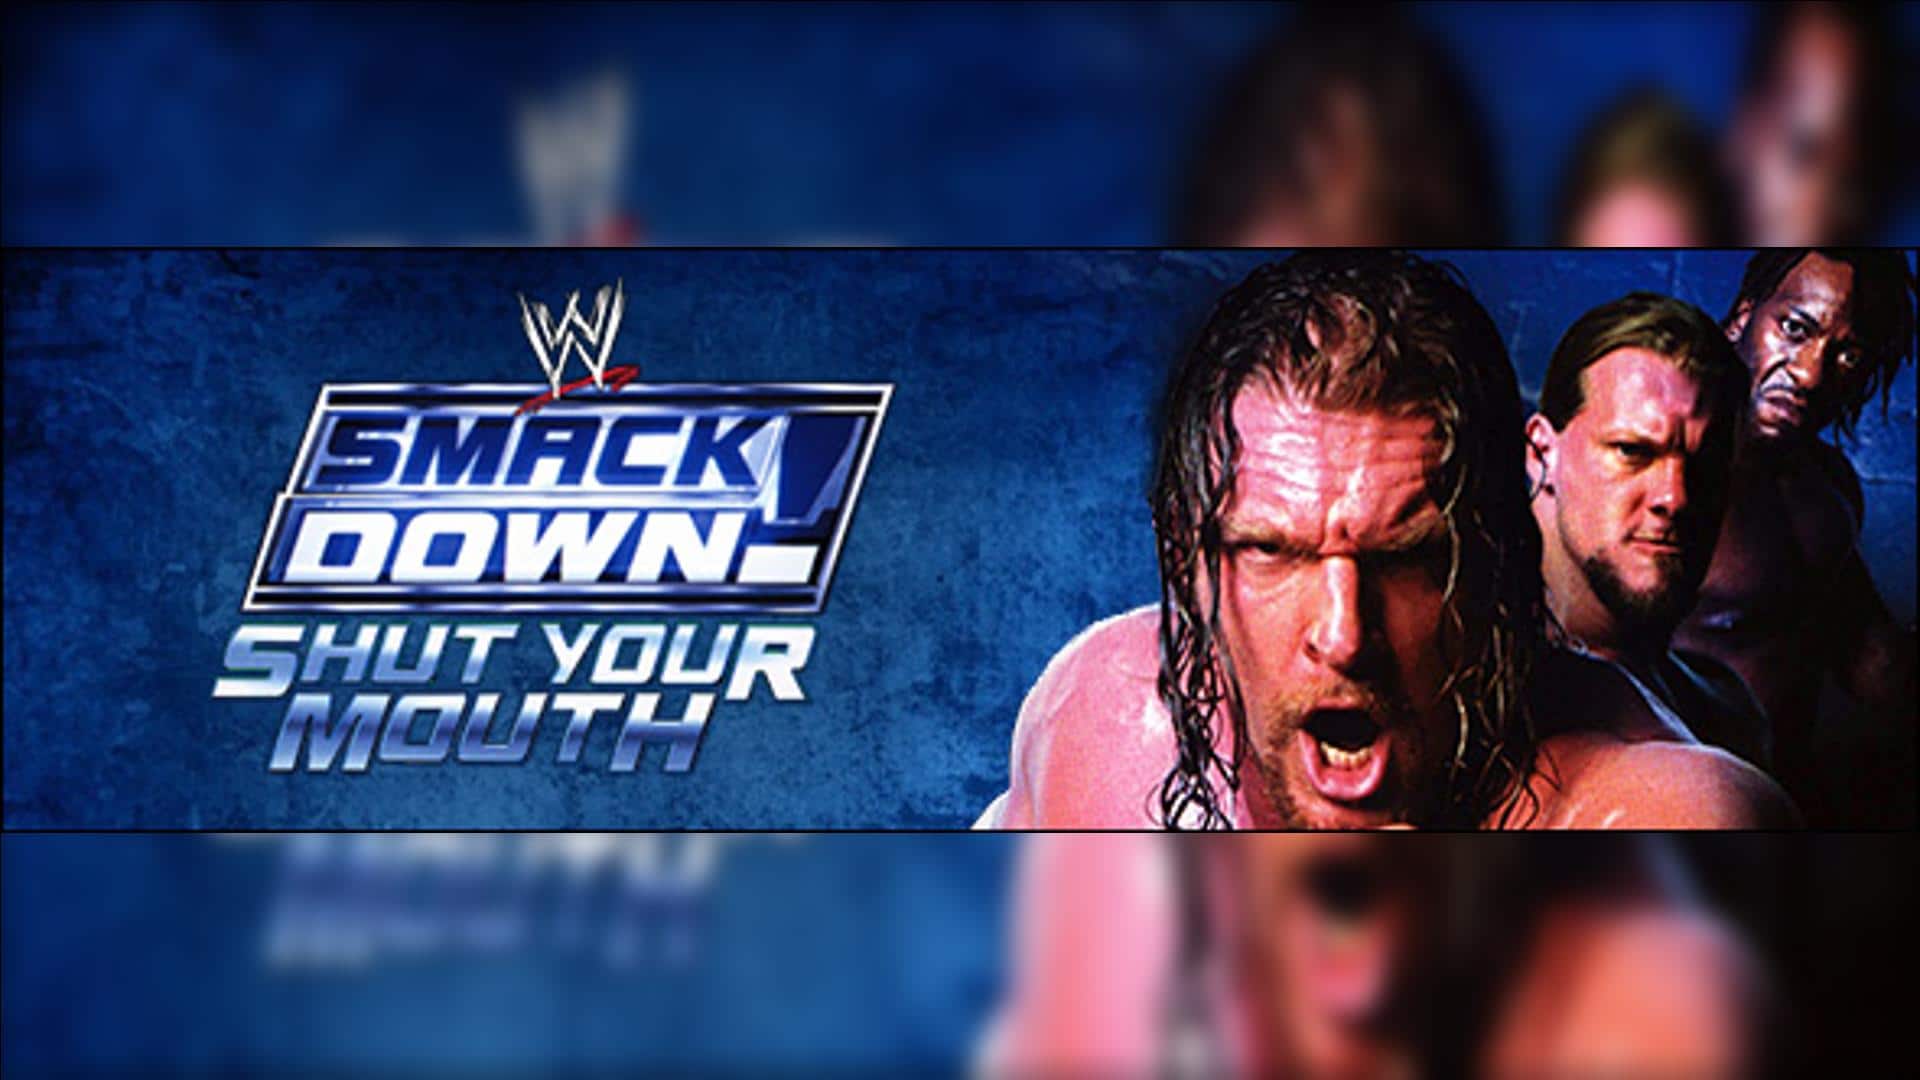 WWE SmackDown Shut Your Mouth PS2 ISO Highly Compressed